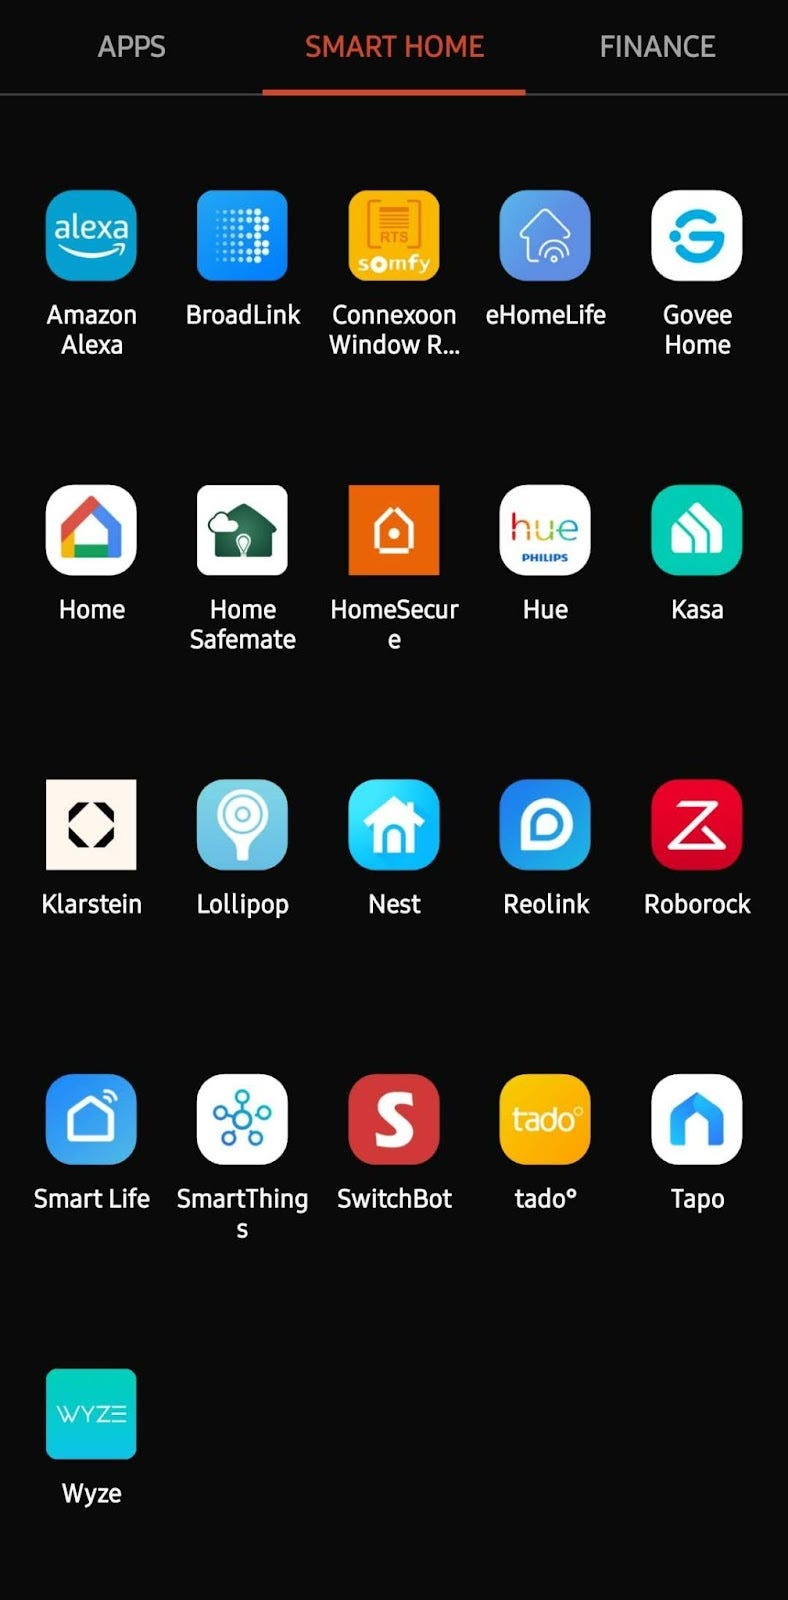 App drawer on a smartphone screen having smart home related apps